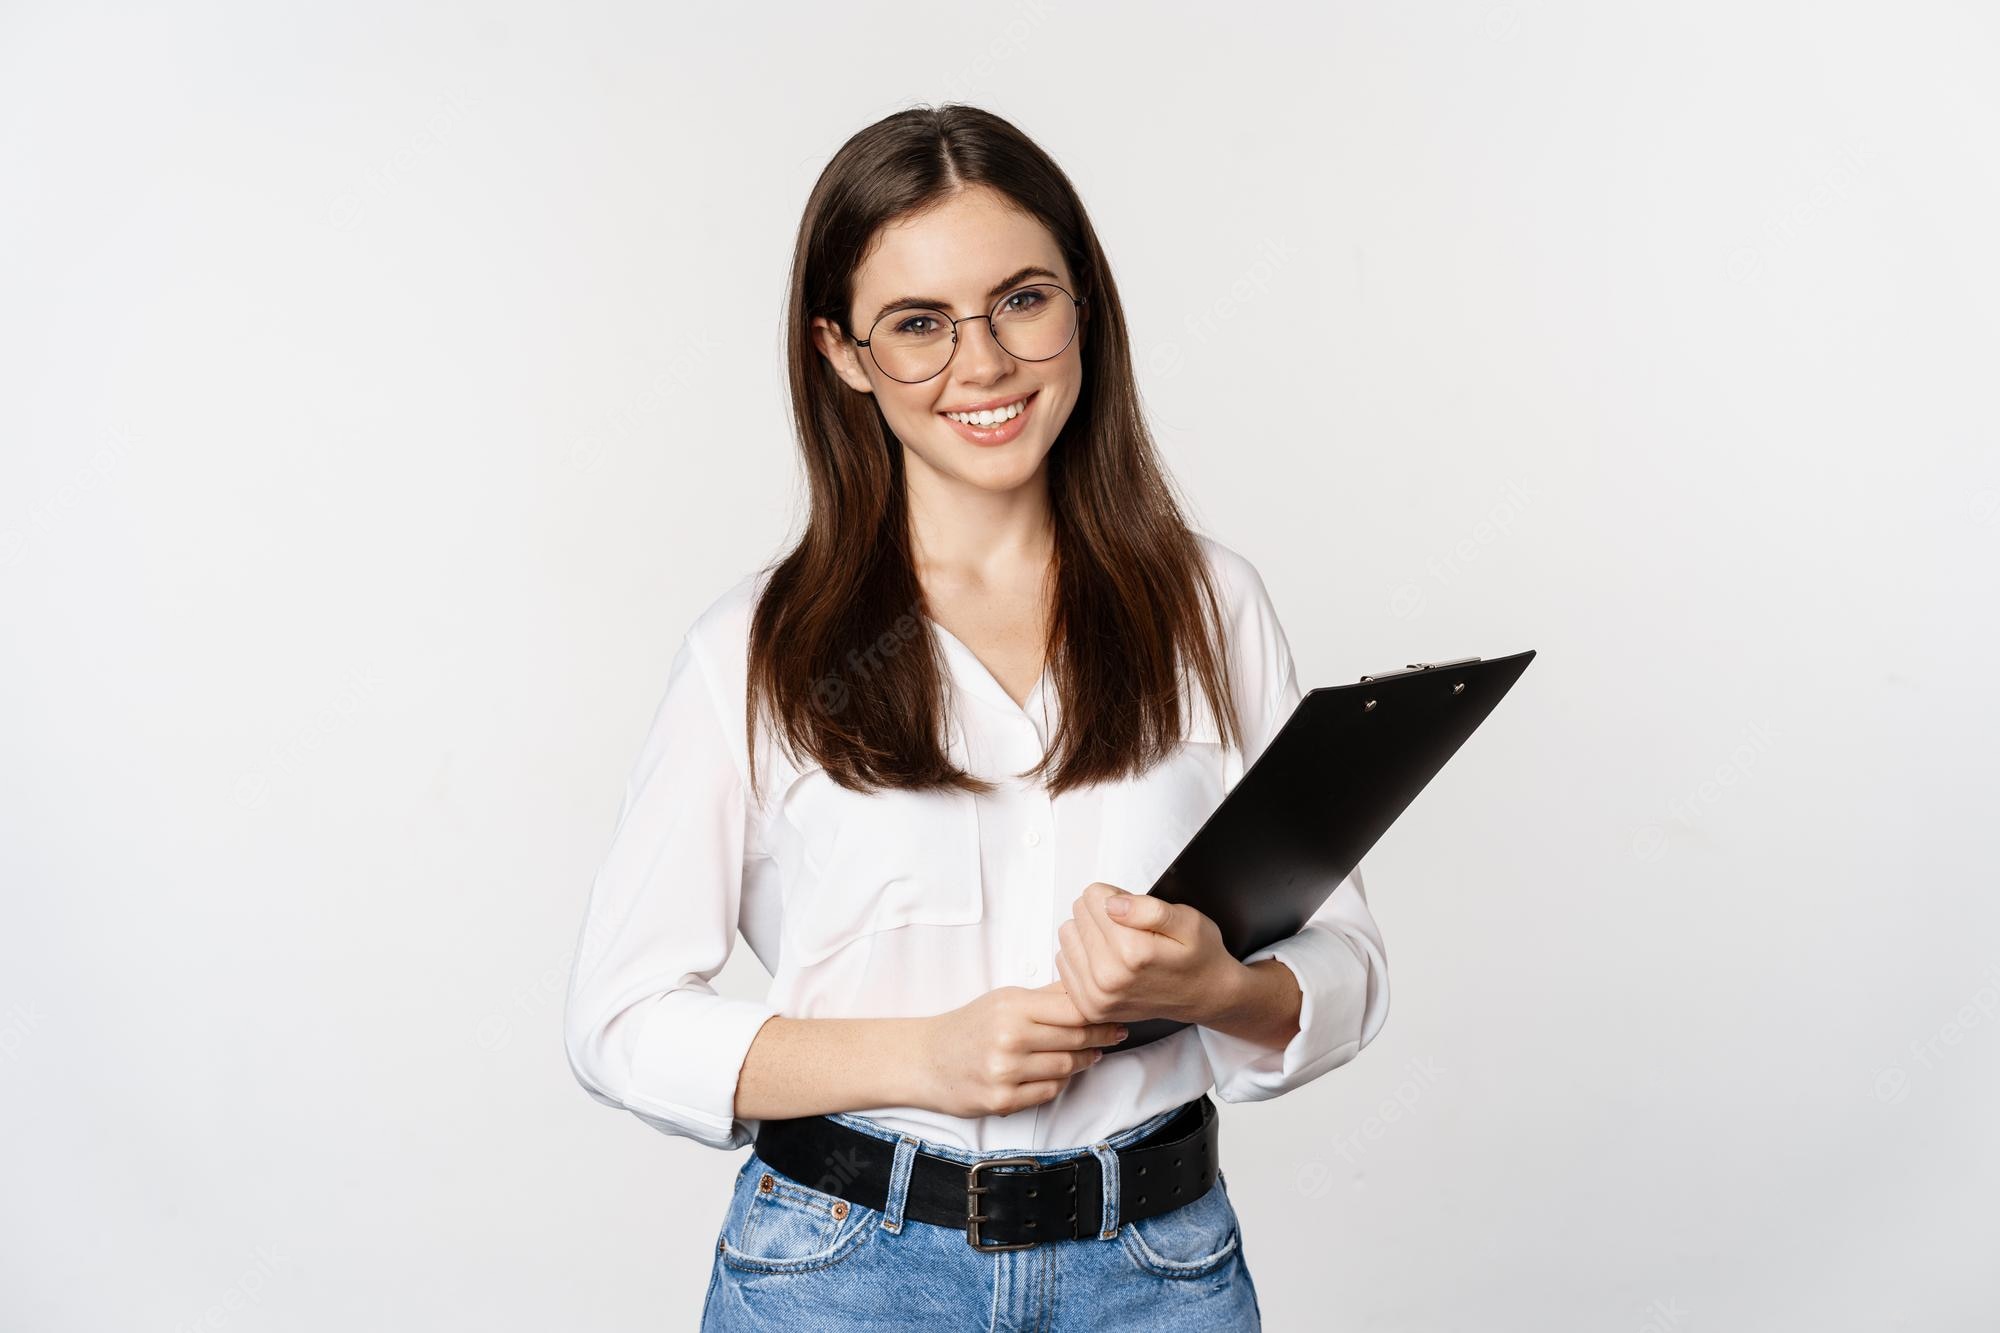 portrait corporate woman holding clipboard work standing formal outfit white background 1258 88411